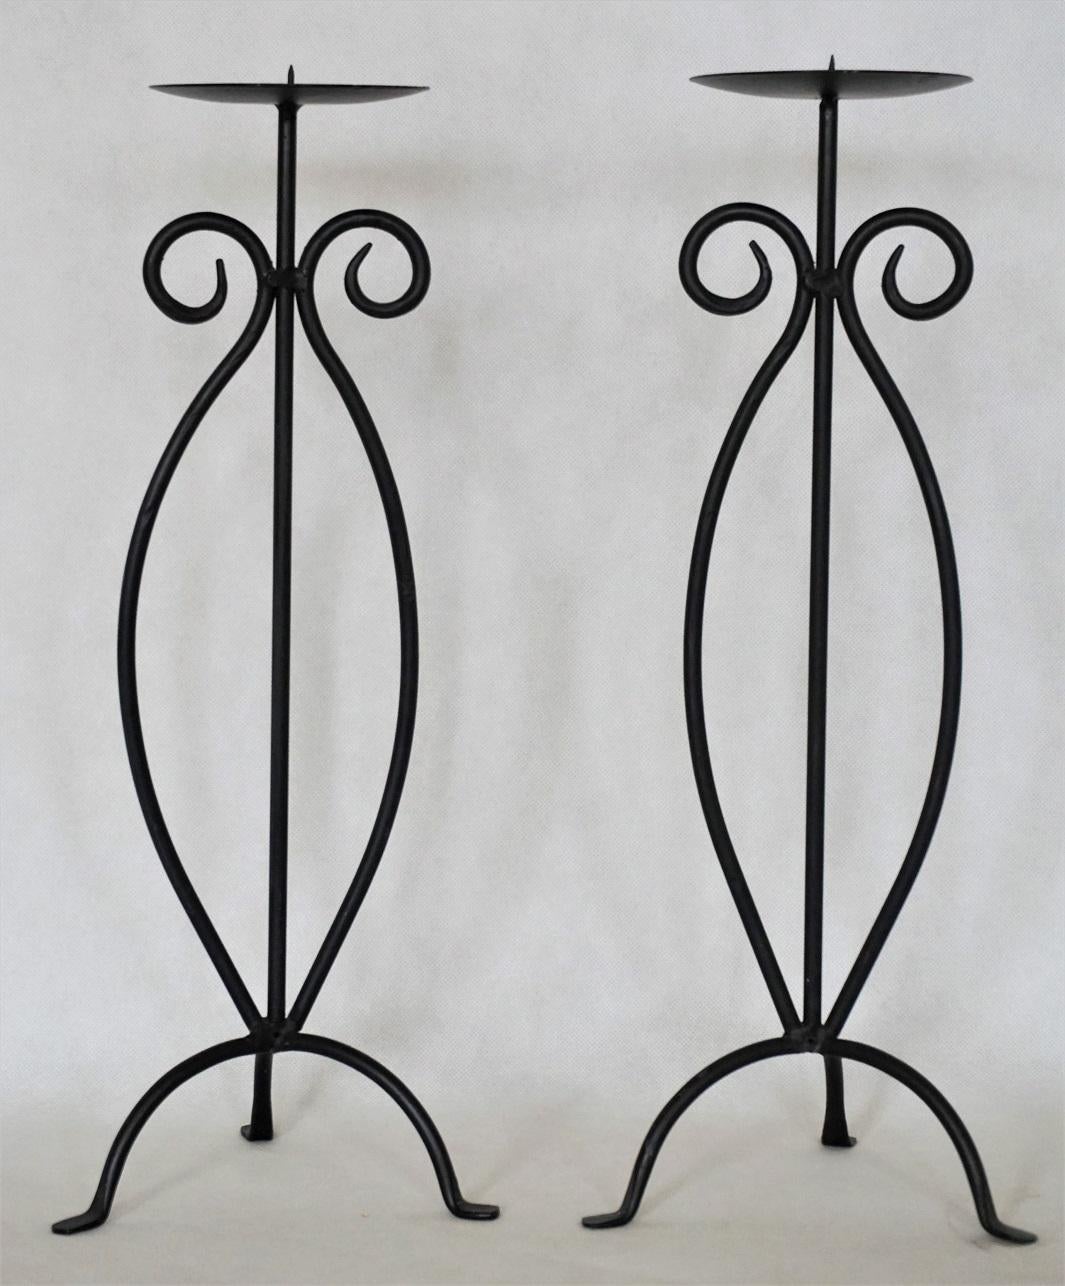 Pair of wrought iron candleholders rised on tripod base, black painted.
Measures:
Height 17.50 in (44.5 cm)
Width/Depth 6.50 in (16.5 cm).
 